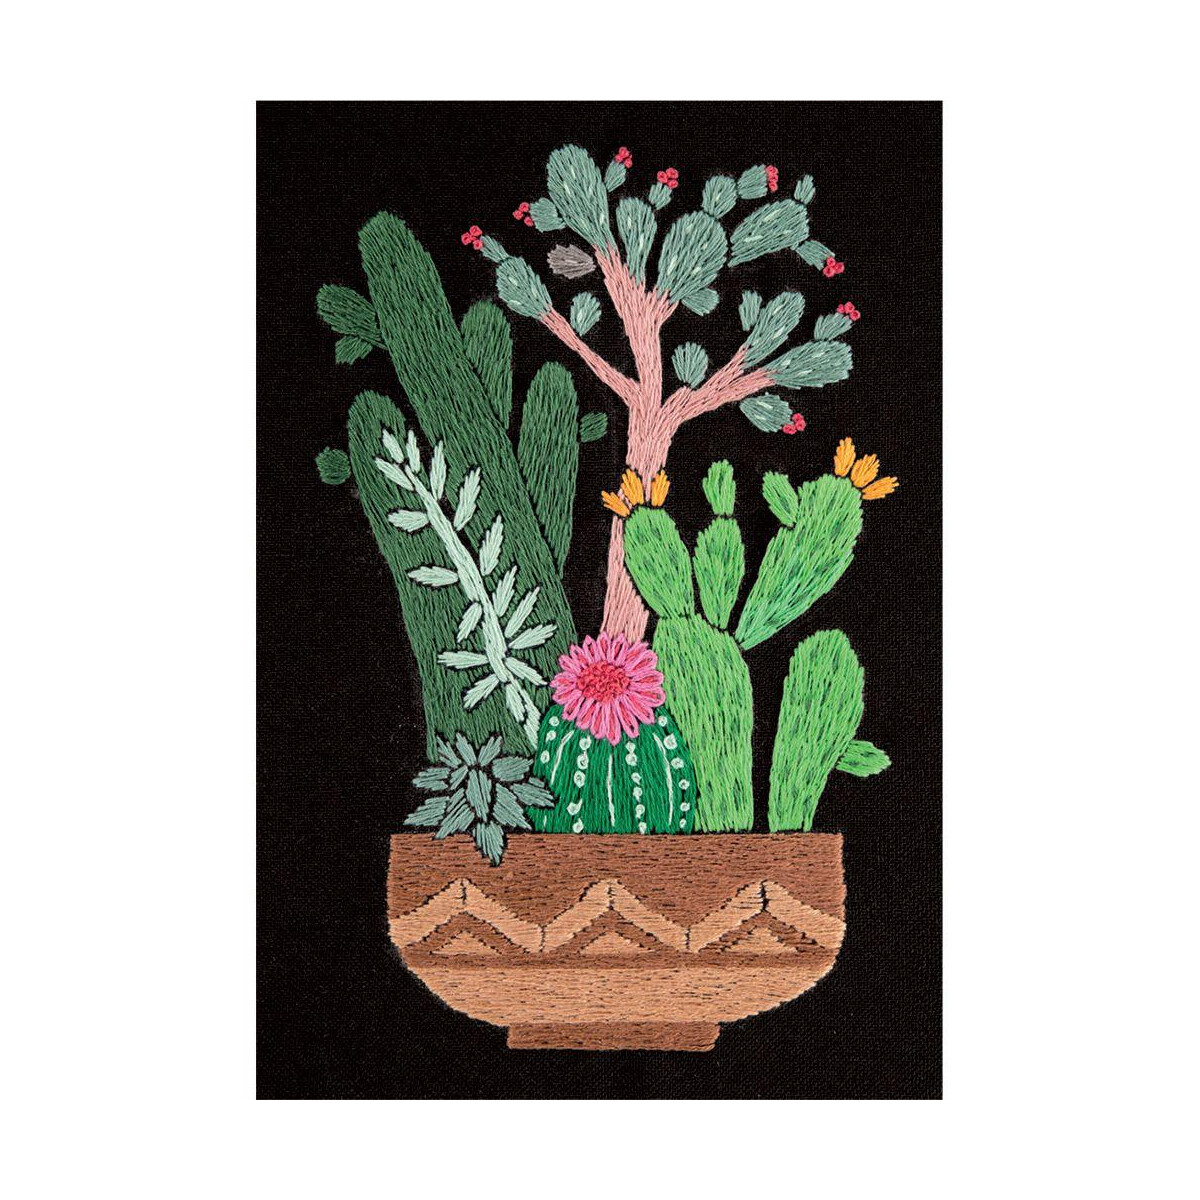 Panna stamped satin stitch kit "Cactuses in...